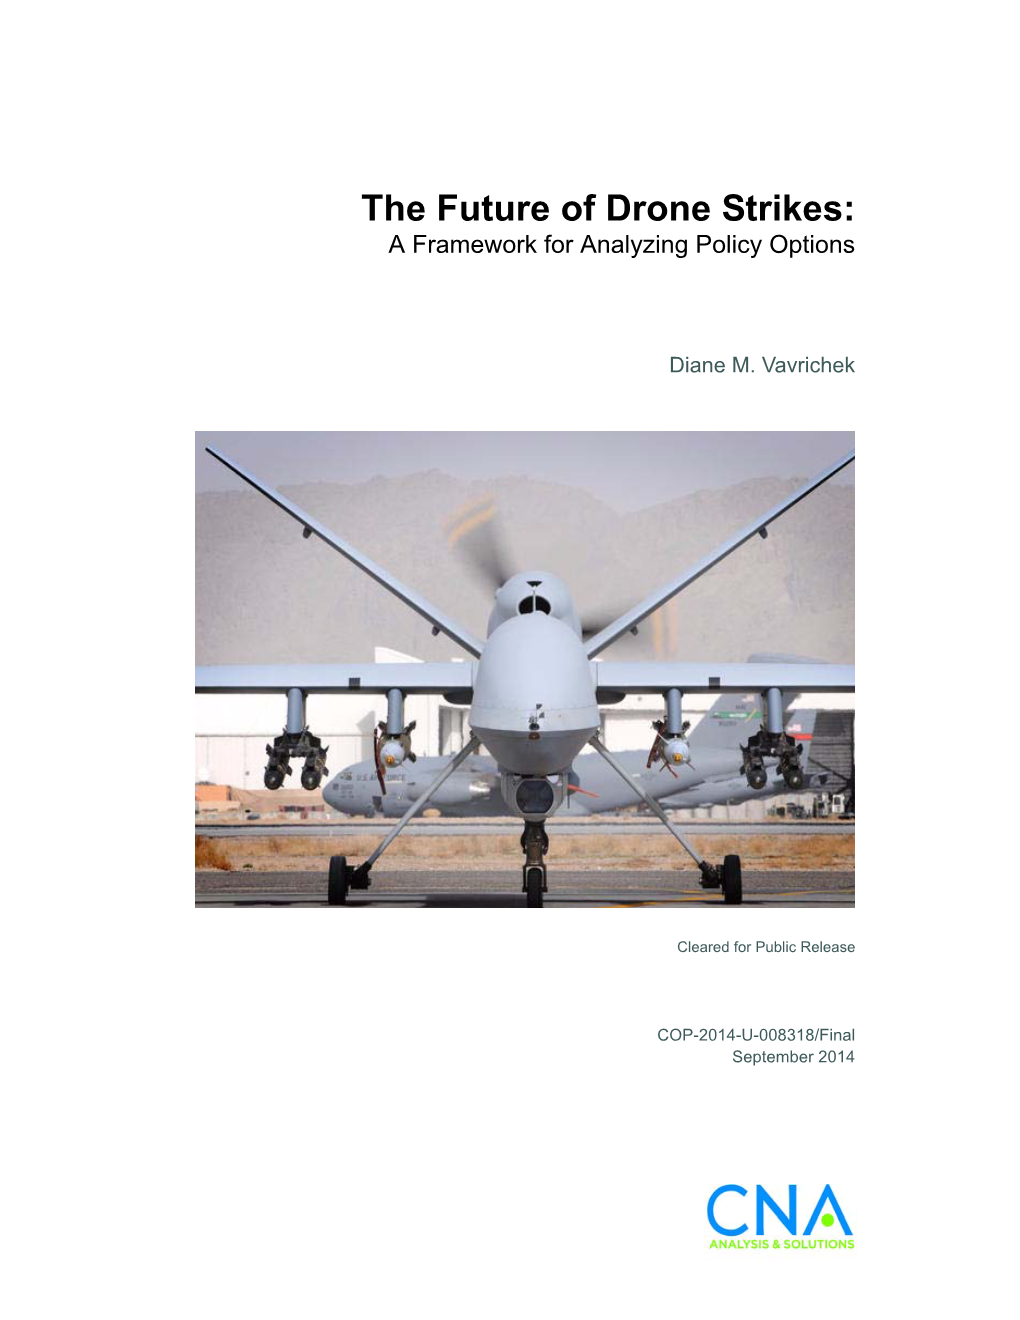 The Future of Drone Strikes: a Framework for Analyzing Policy Options